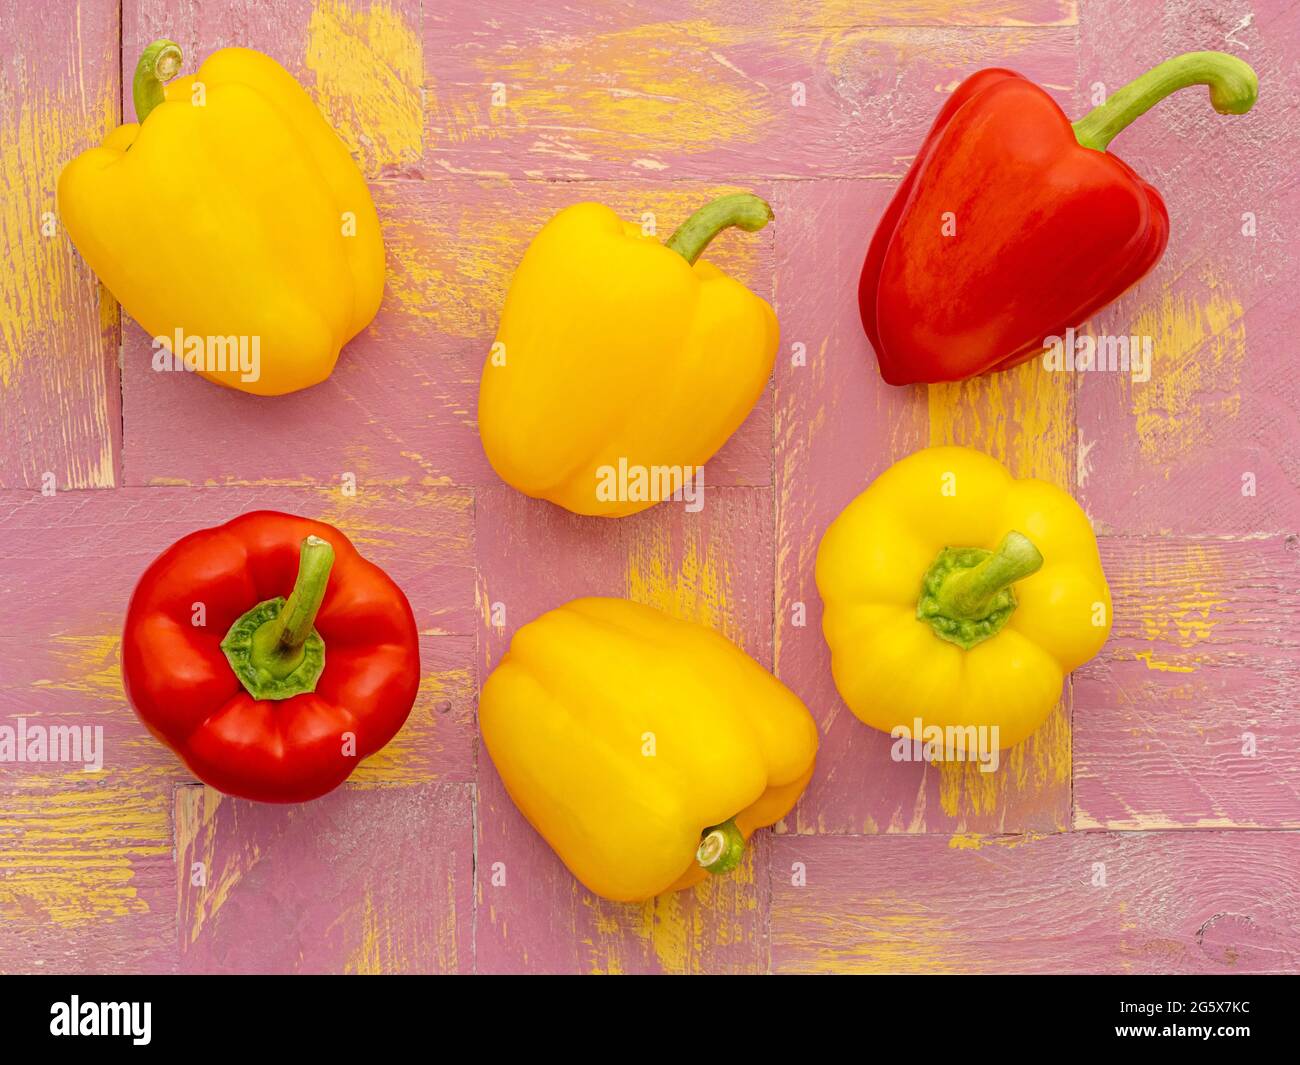 Plan view of red and yellow bell peppers on a pink and yellow  wooden background. Stock Photo